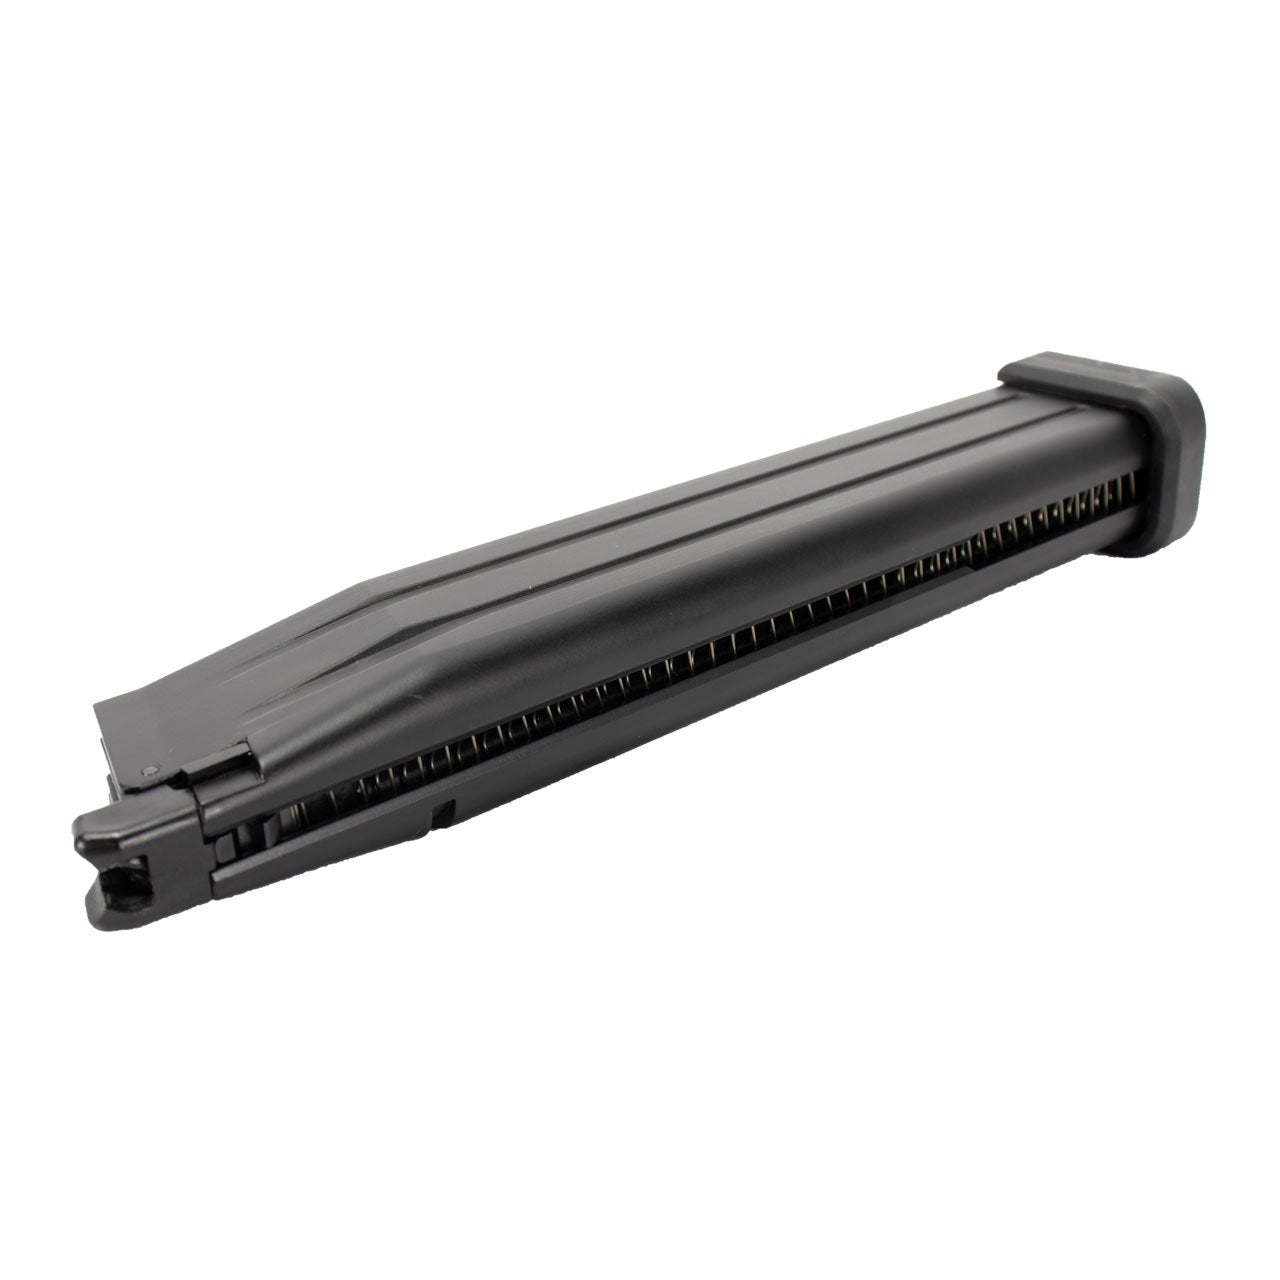 WE-Tech 52 Round Extended Magazine for Hi-Capa Gas Blowback Airsoft Pistols - ssairsoft.com